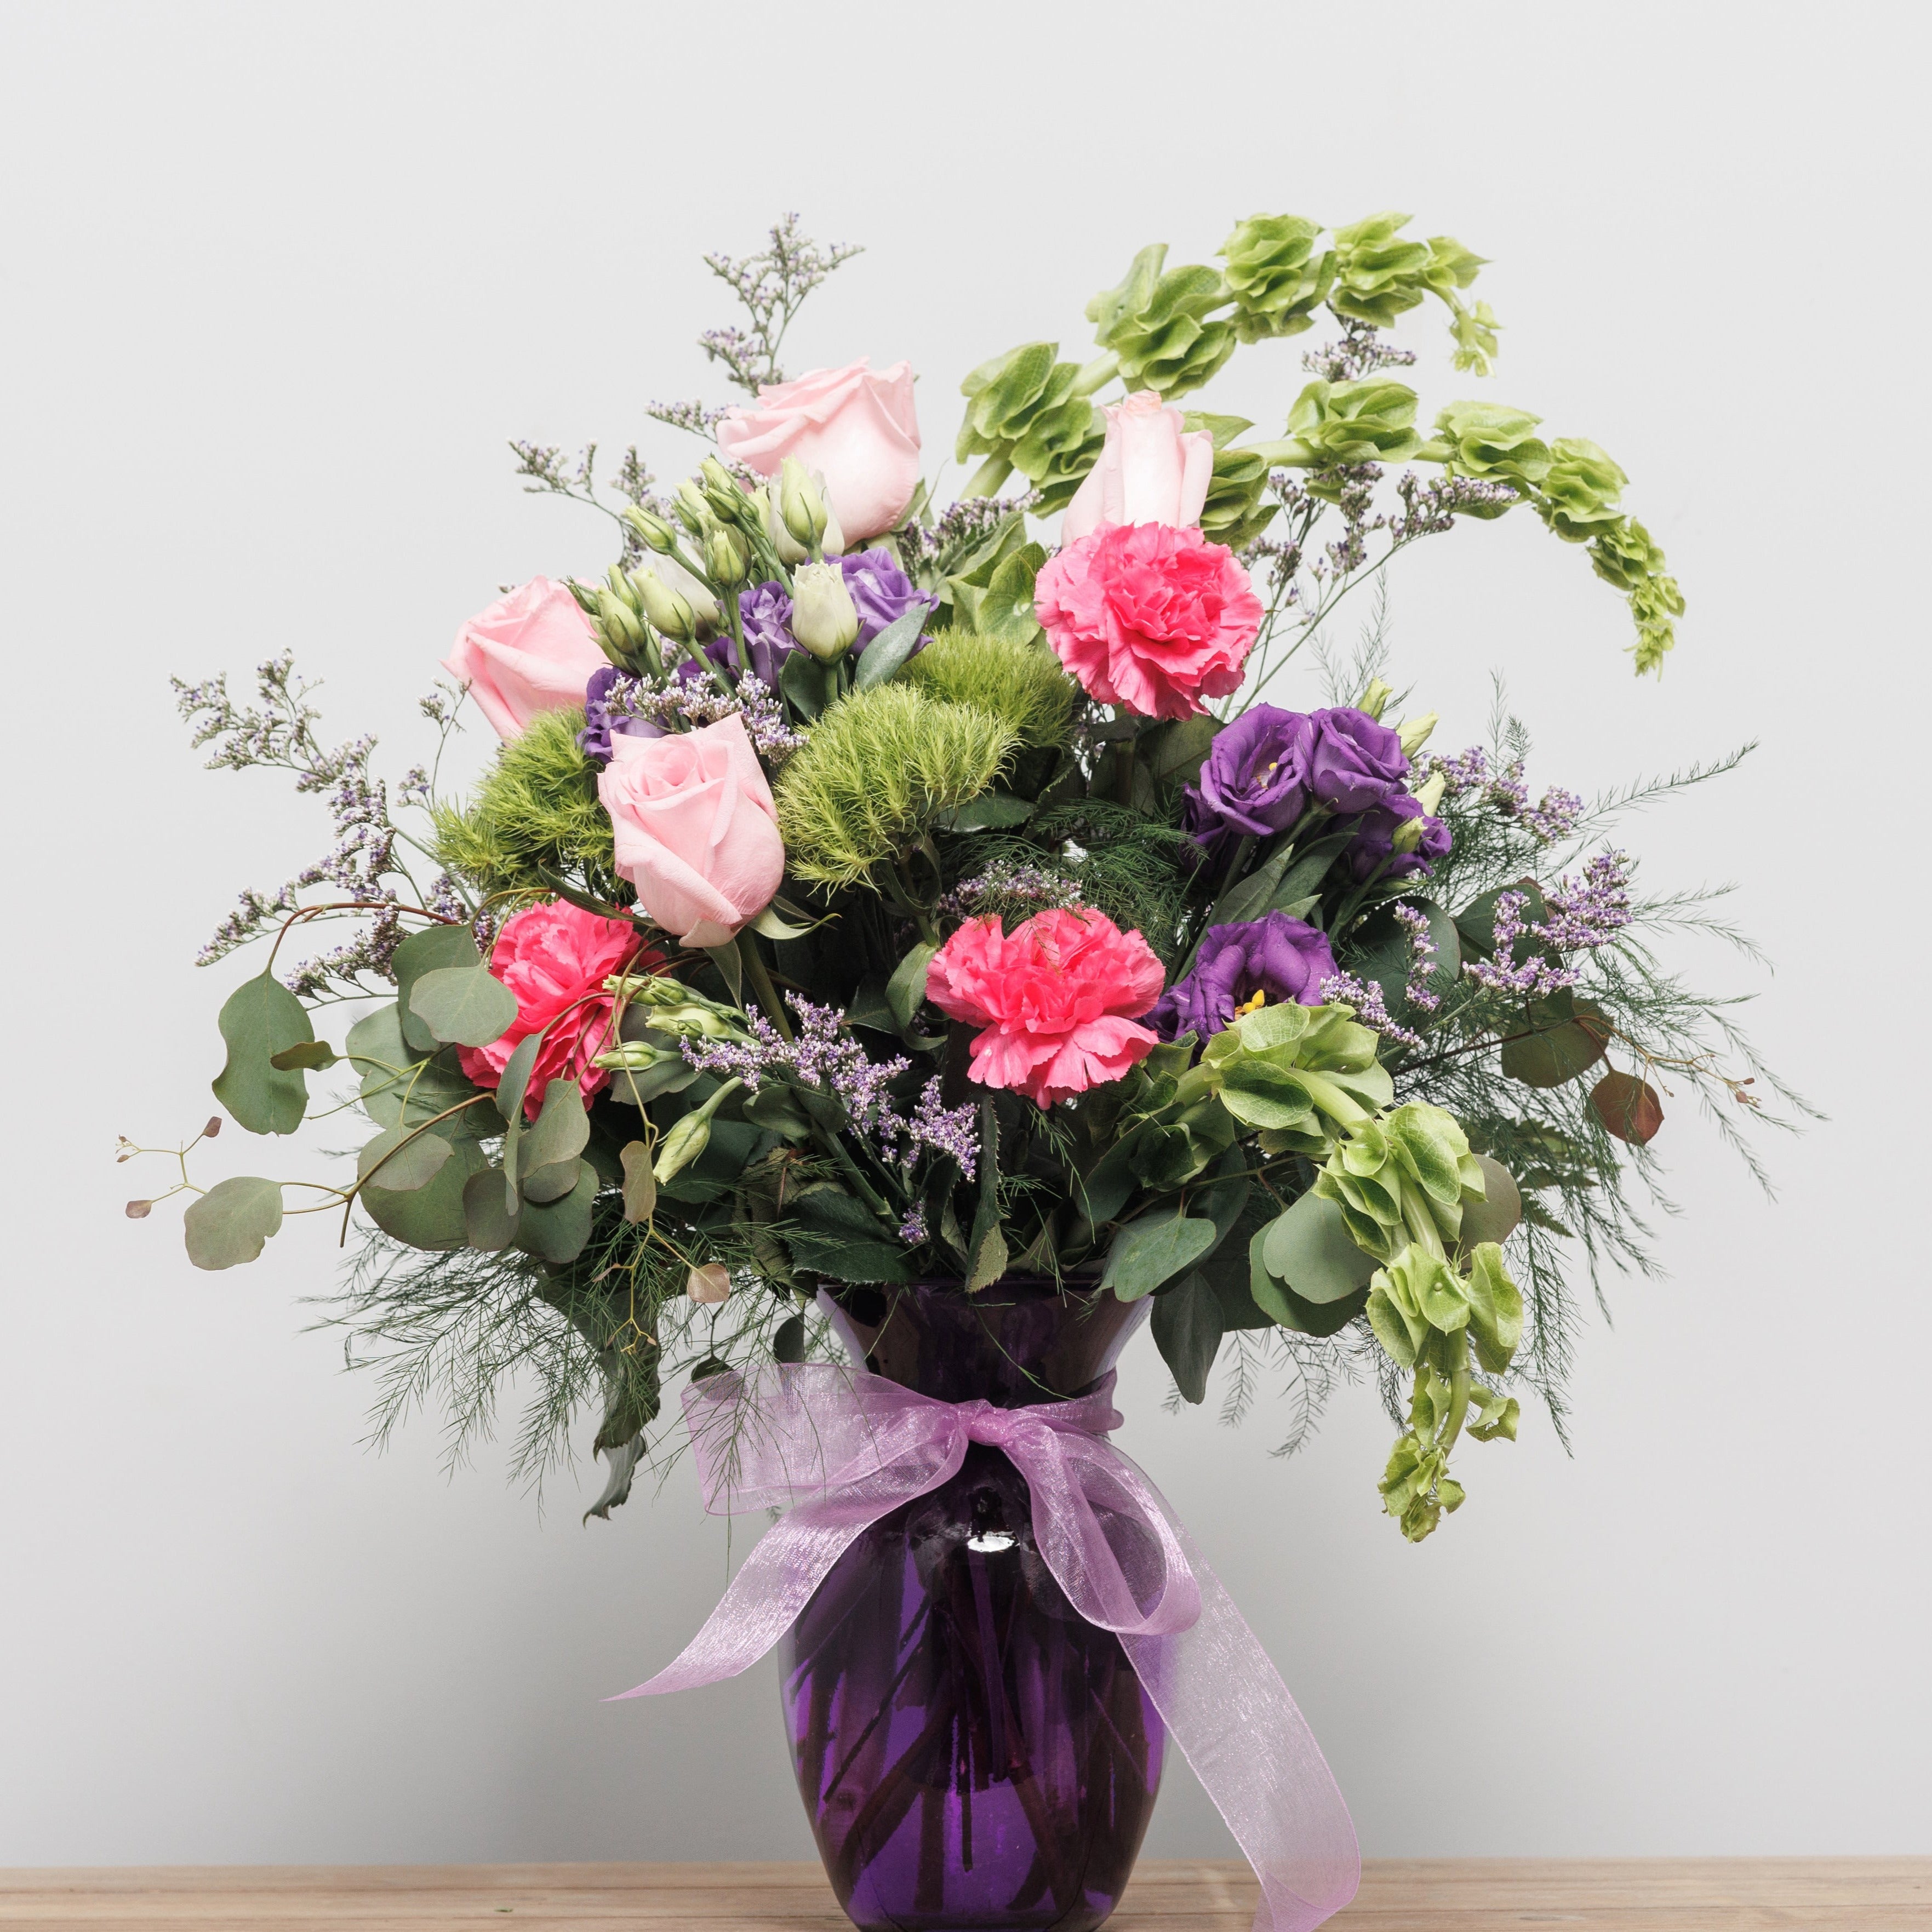 Lime green and pink flowers in a purple vase